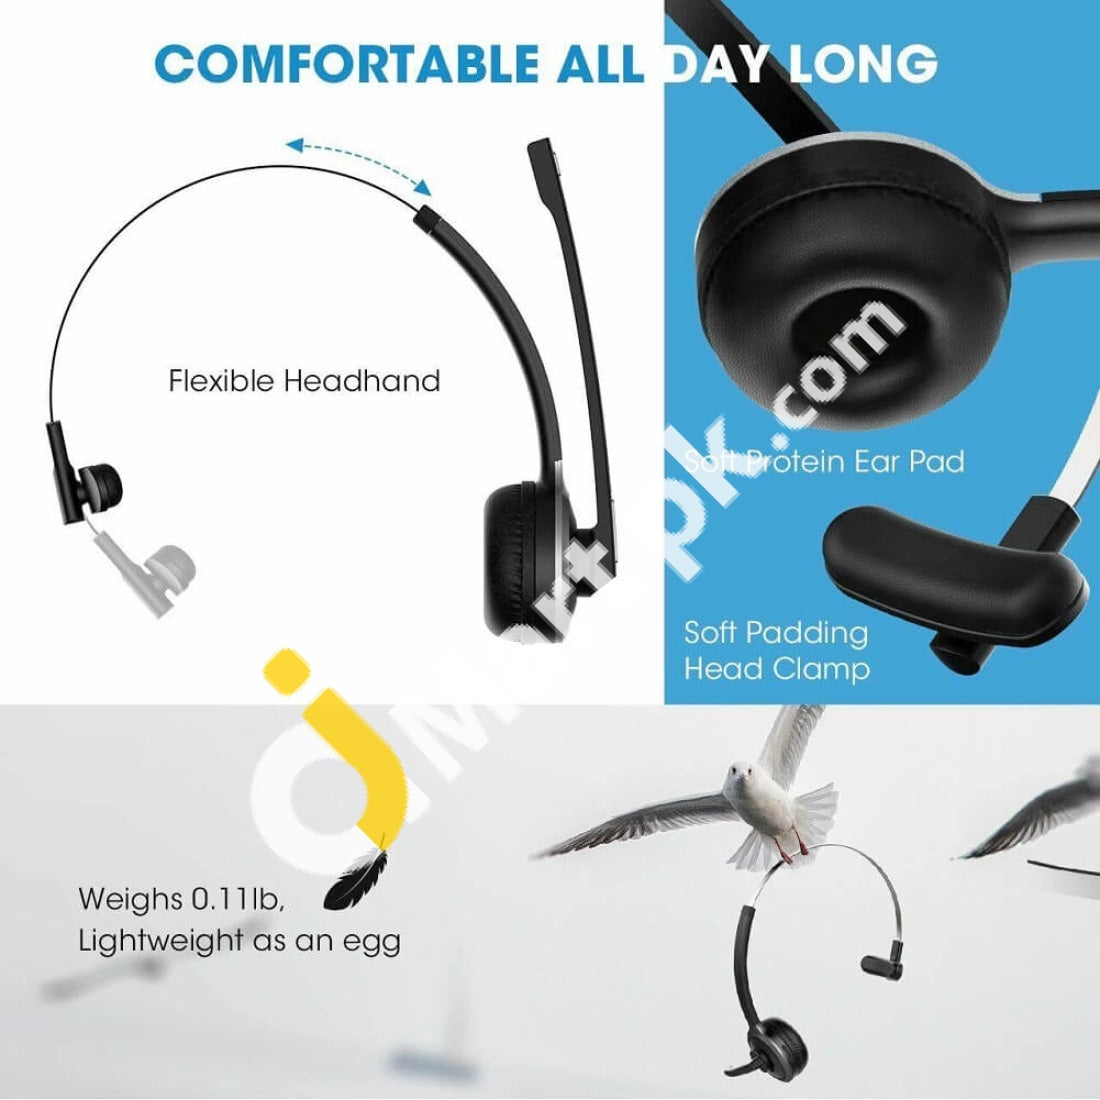 Wireless Headset Mpow M5 Bluetooth 5.0 Over-Head Noise Canceling Headphones With Crystal Clear